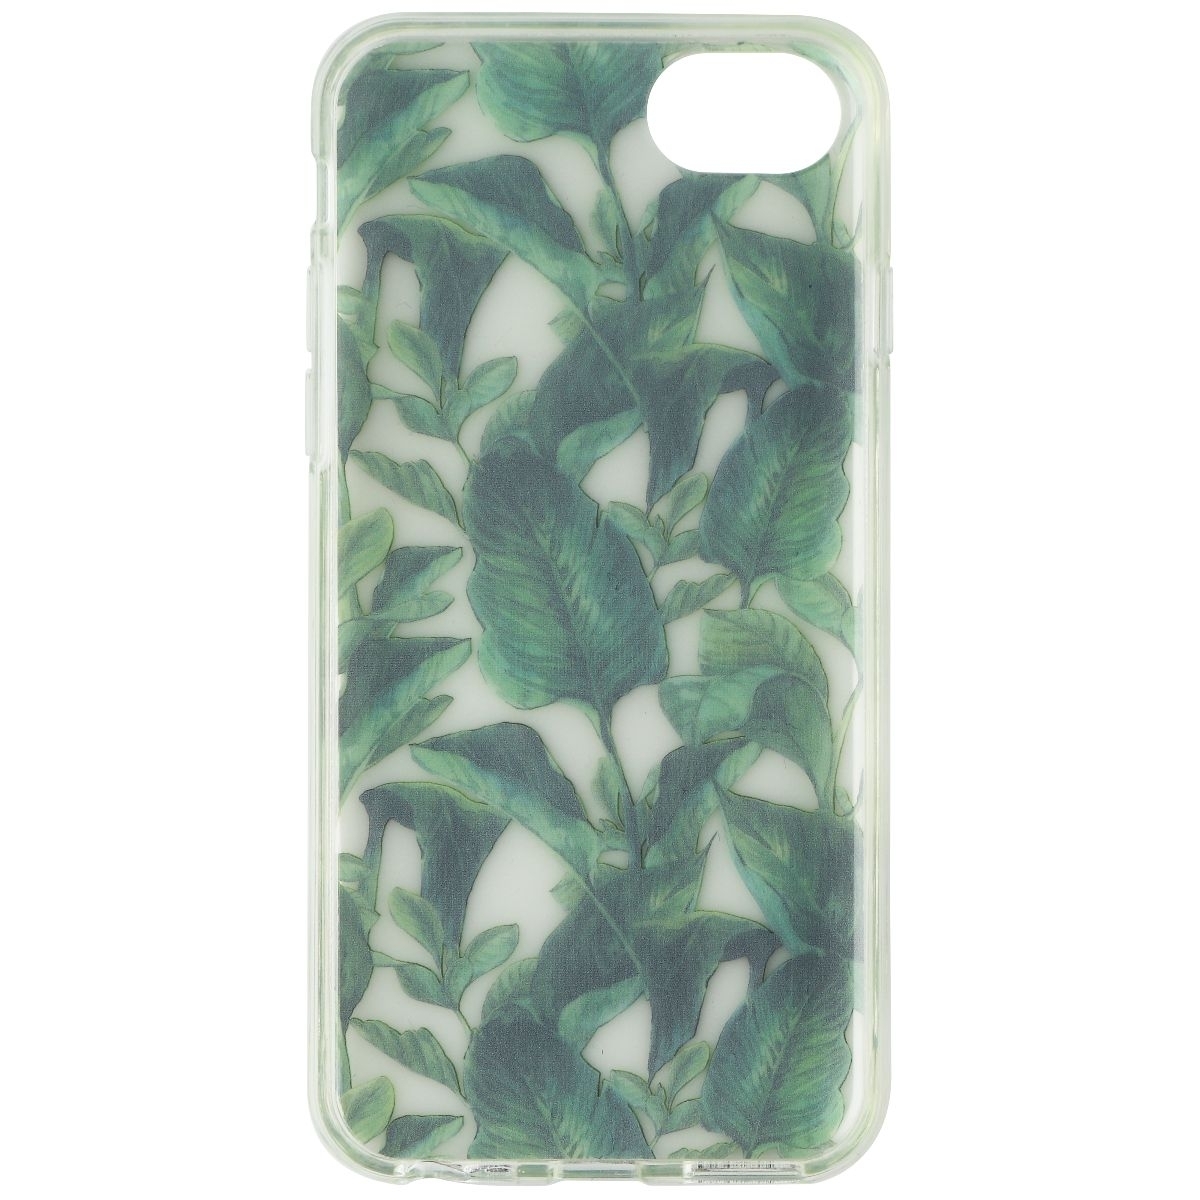 StrongnFree Hard Case For Apple IPhone 7/6s/6 - Clear/Green Leaves (Refurbished)